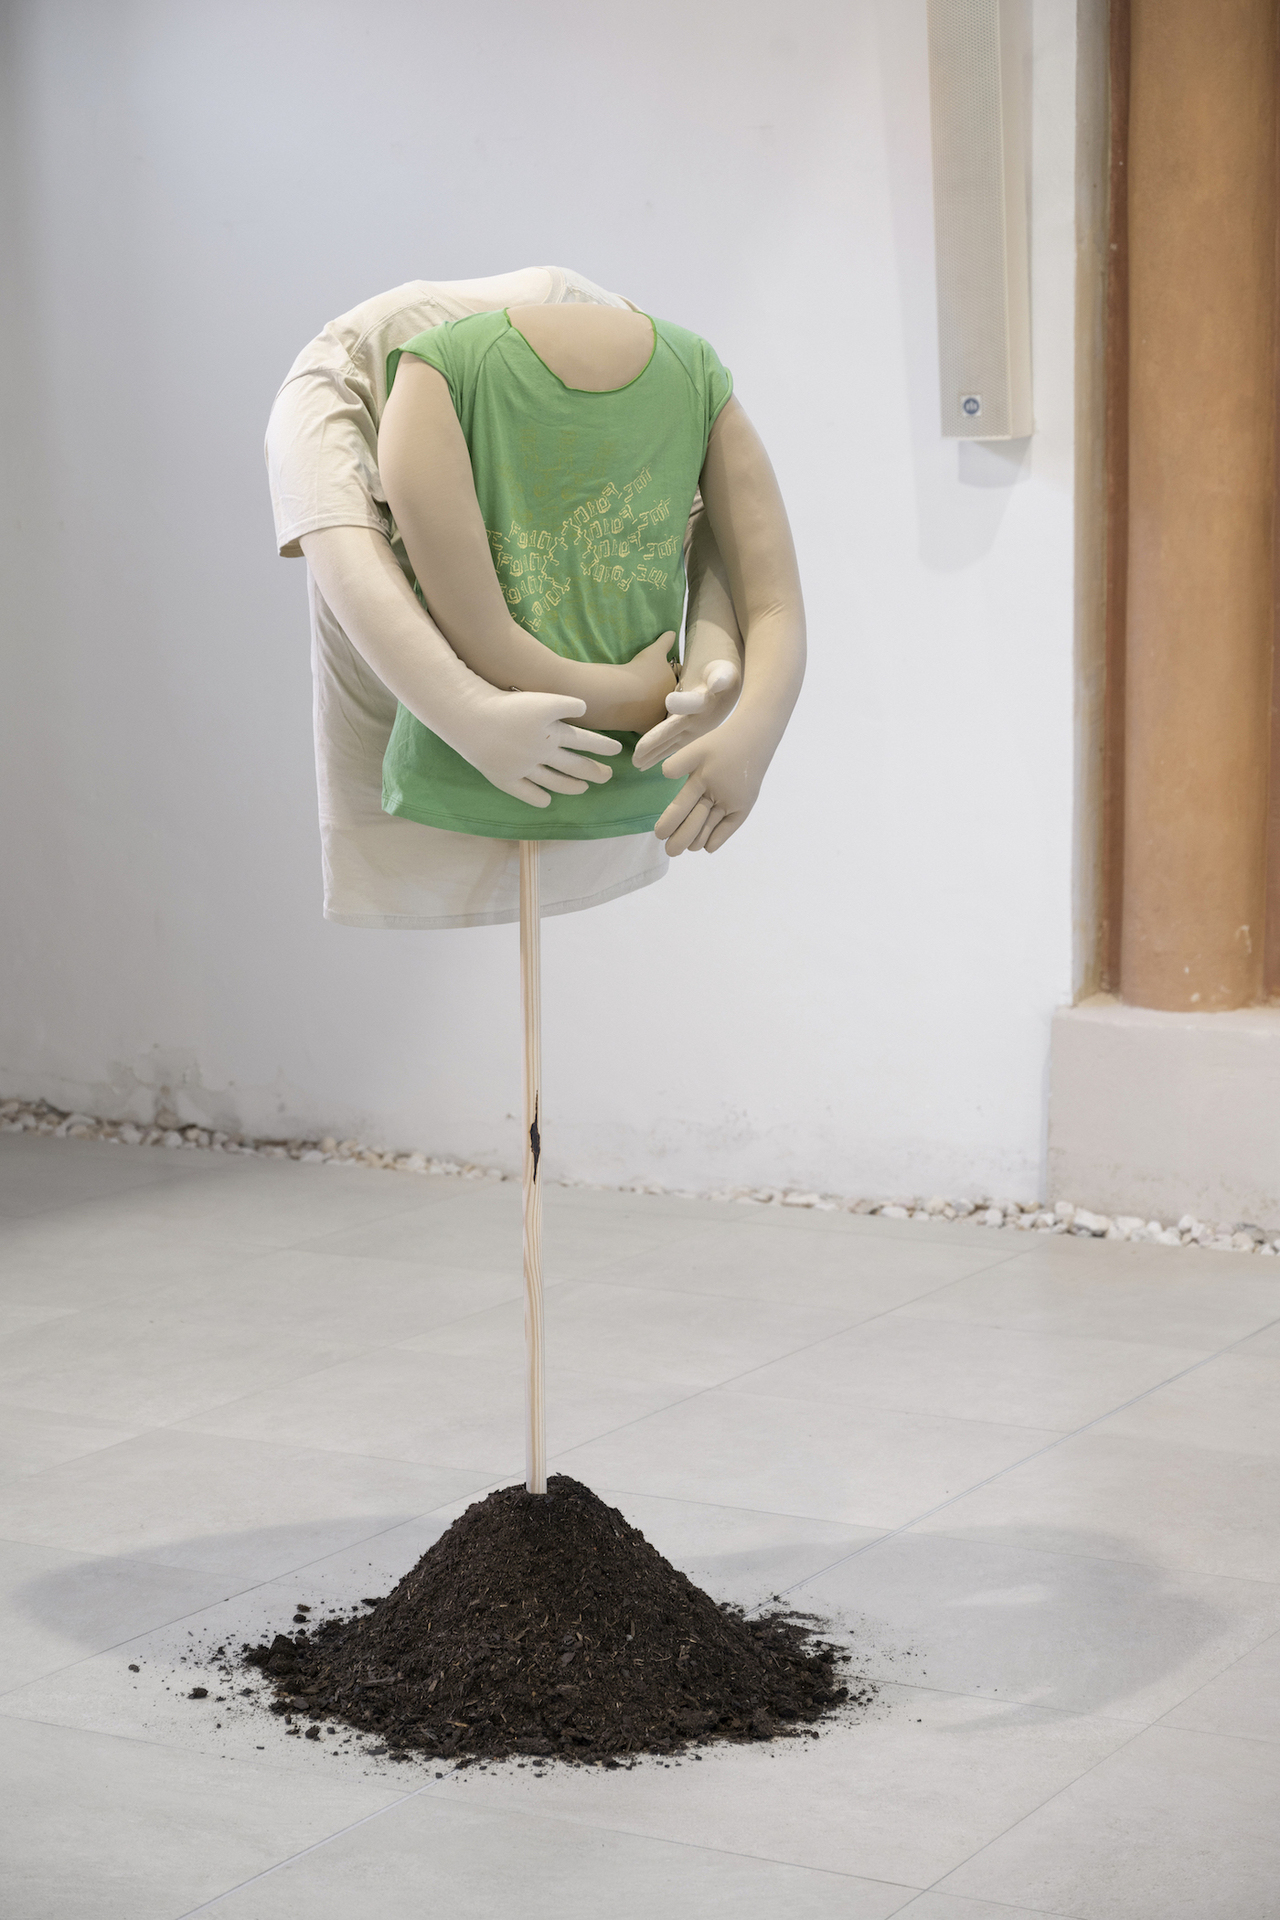 Radek Brousil – Standing, Holding a Waterlily, 2019, installation, variable dimensions